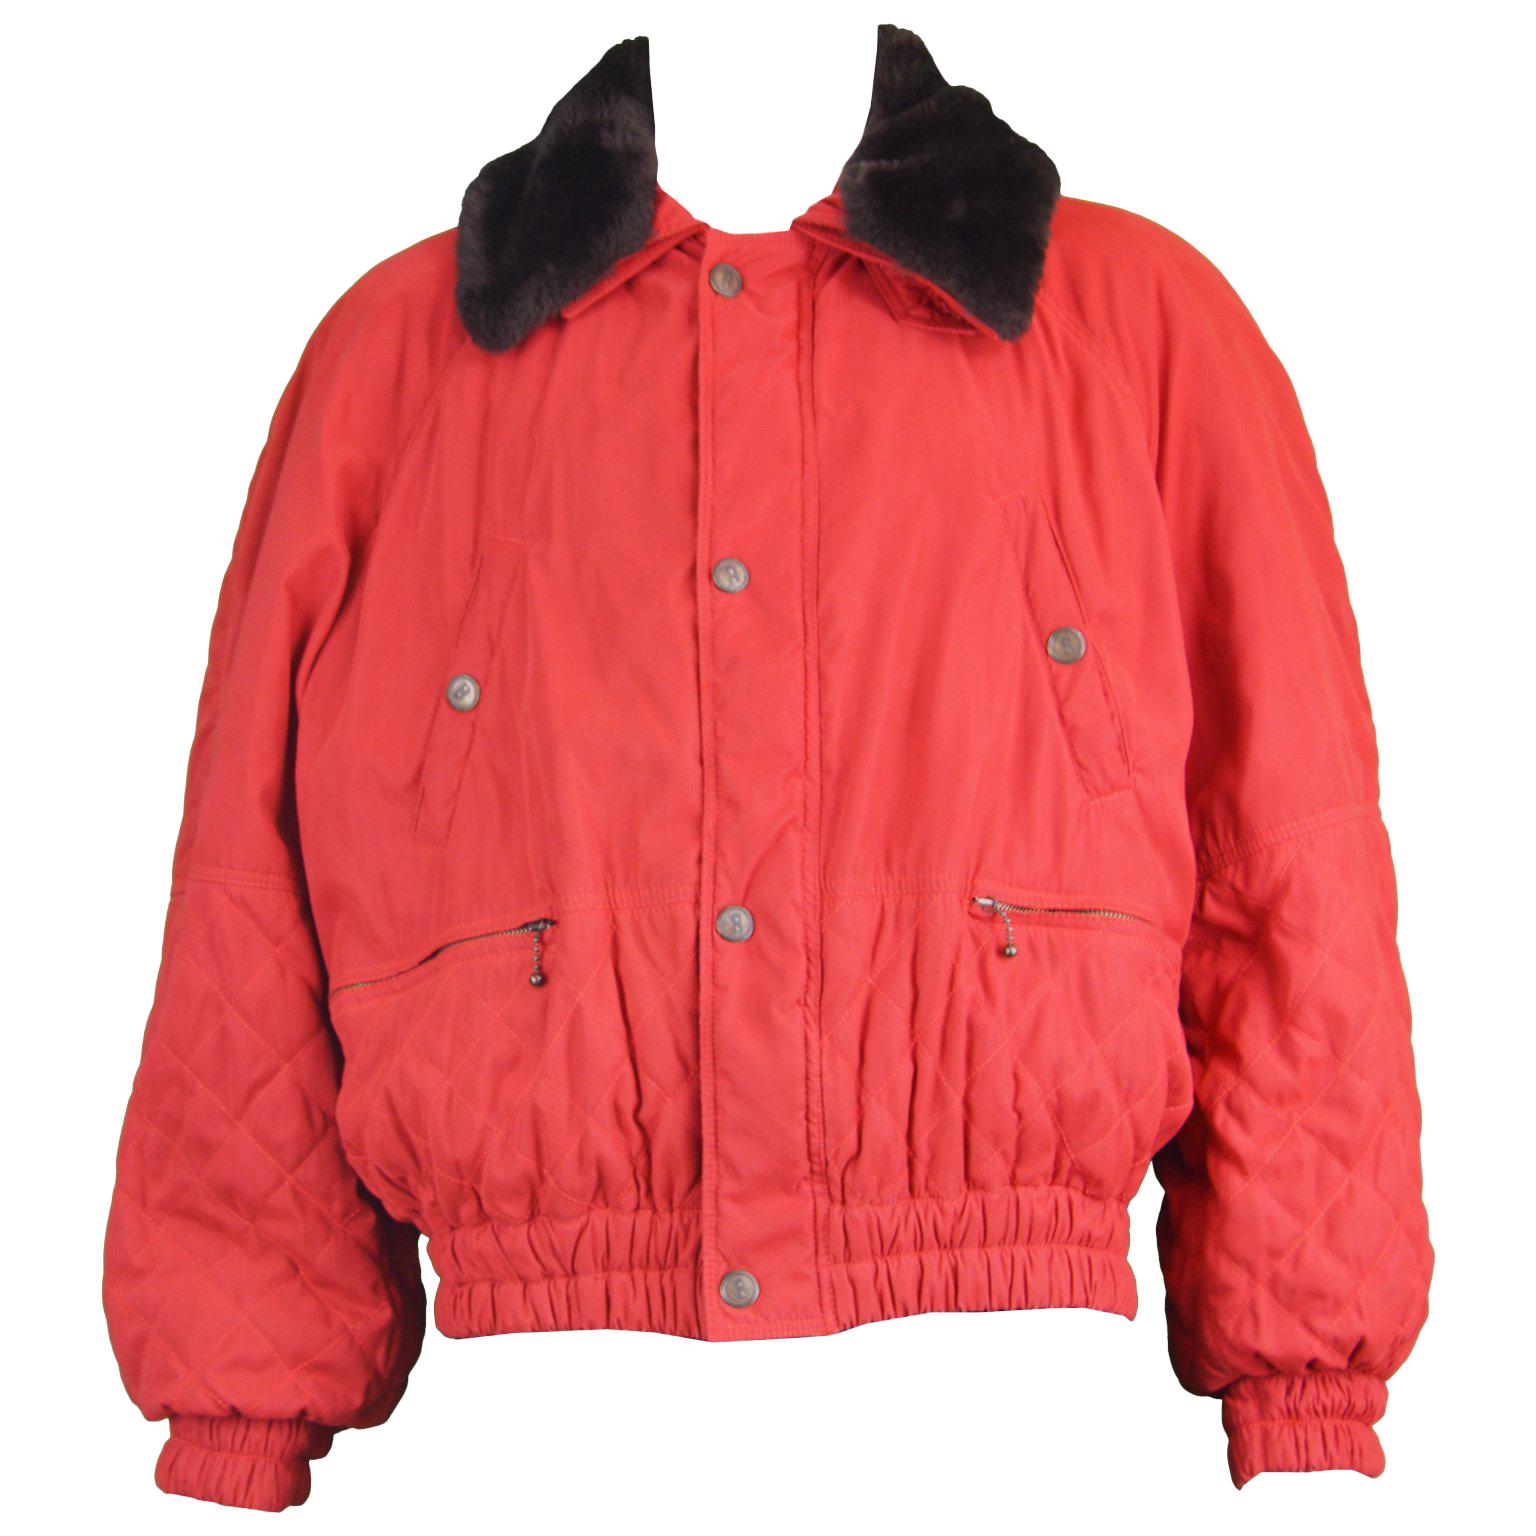 Oliver by Valentino Men's Vintage Red Quilted Bomber Jacket Coat, 1980s